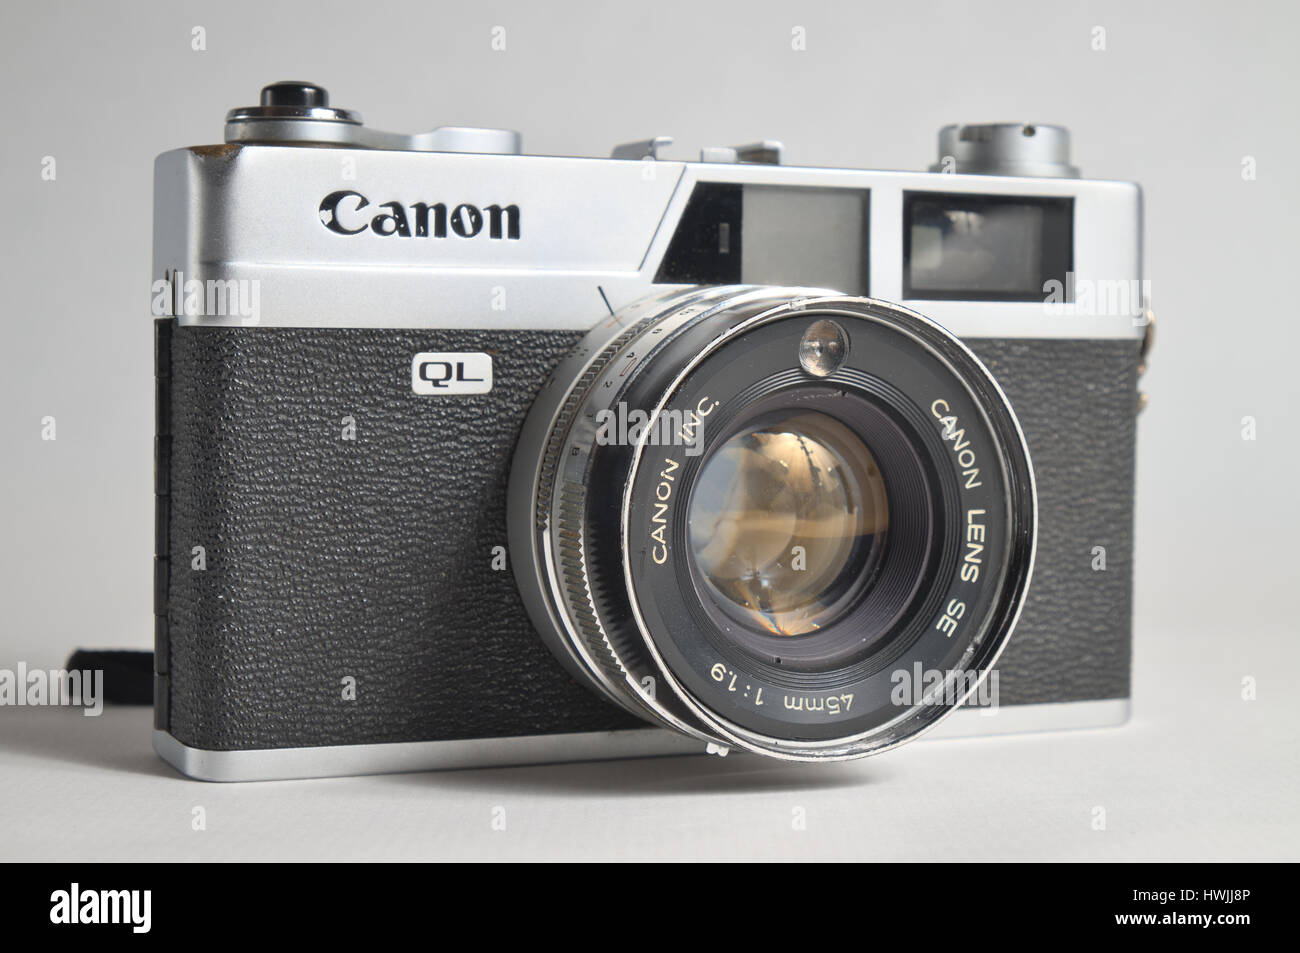 Old Canon analogue camera, model Canonet QL19. 35mm film compact camera,  with 45mm Canon lens lens f/1.9 Stock Photo - Alamy